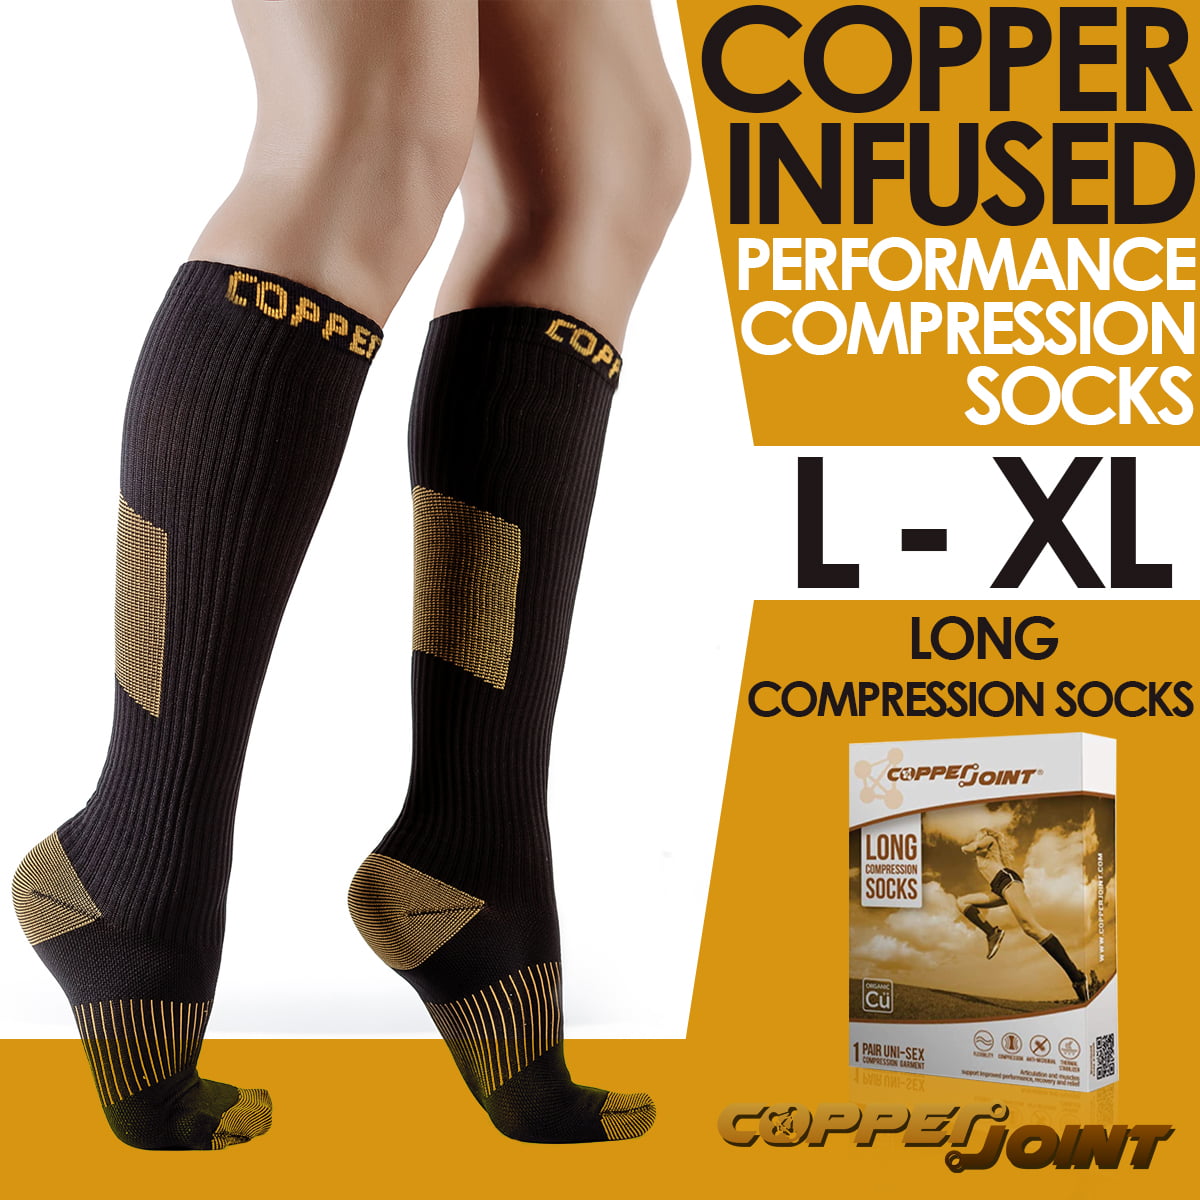 Download CopperJoint Long Compression Socks - Copper-Infused and ...